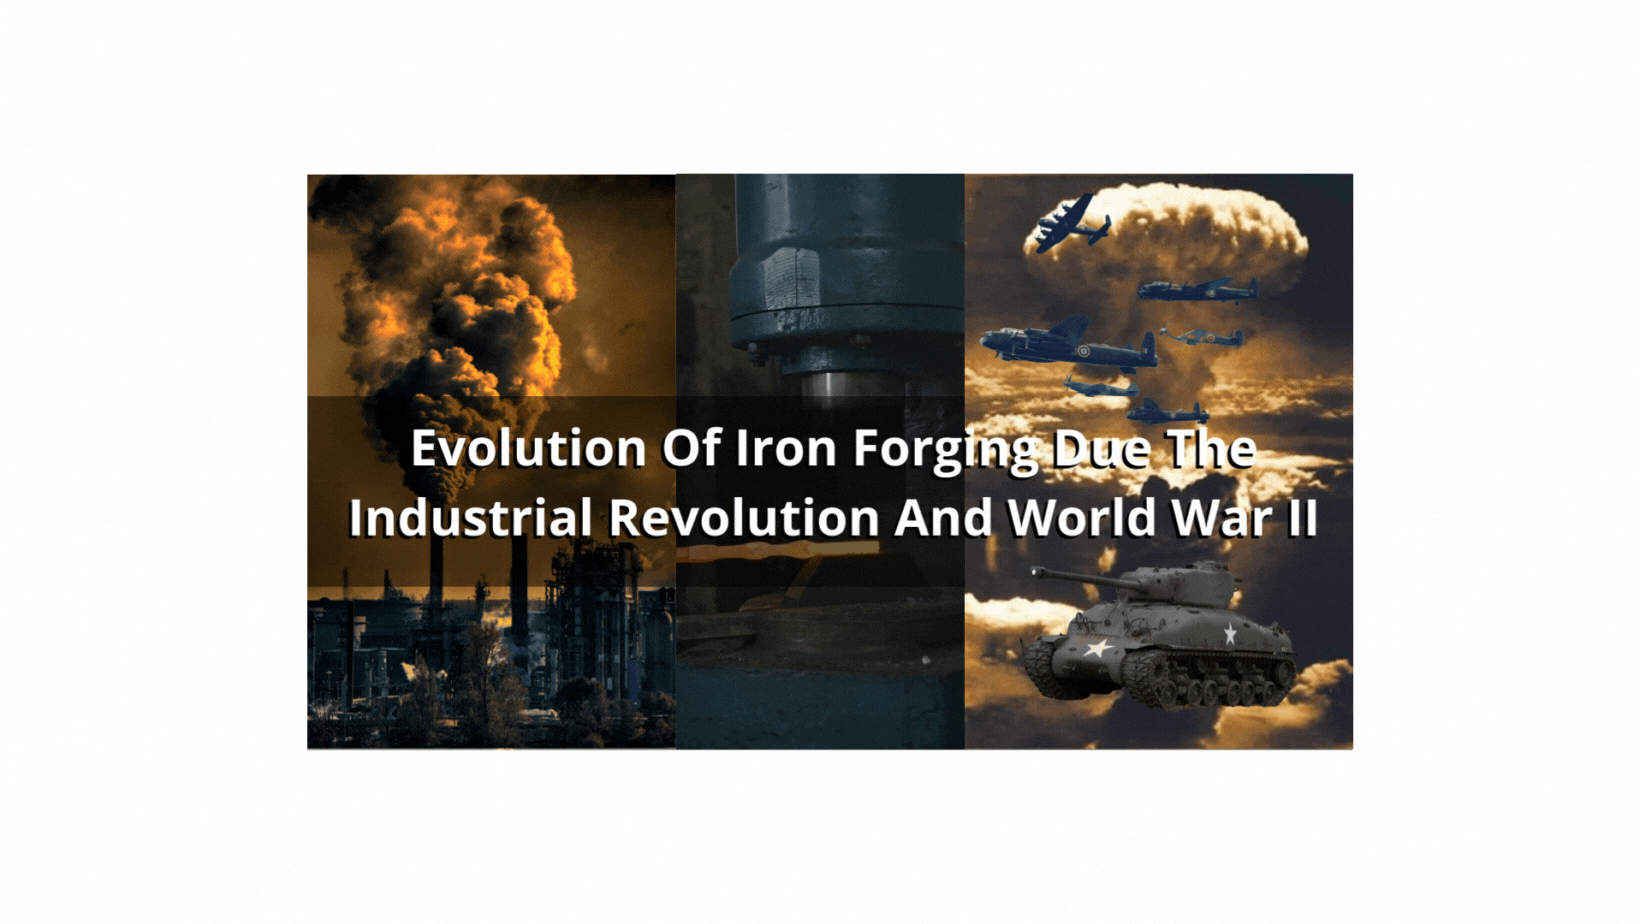 Evolution Of Iron Forging Due The Industrial Revolution And World War II